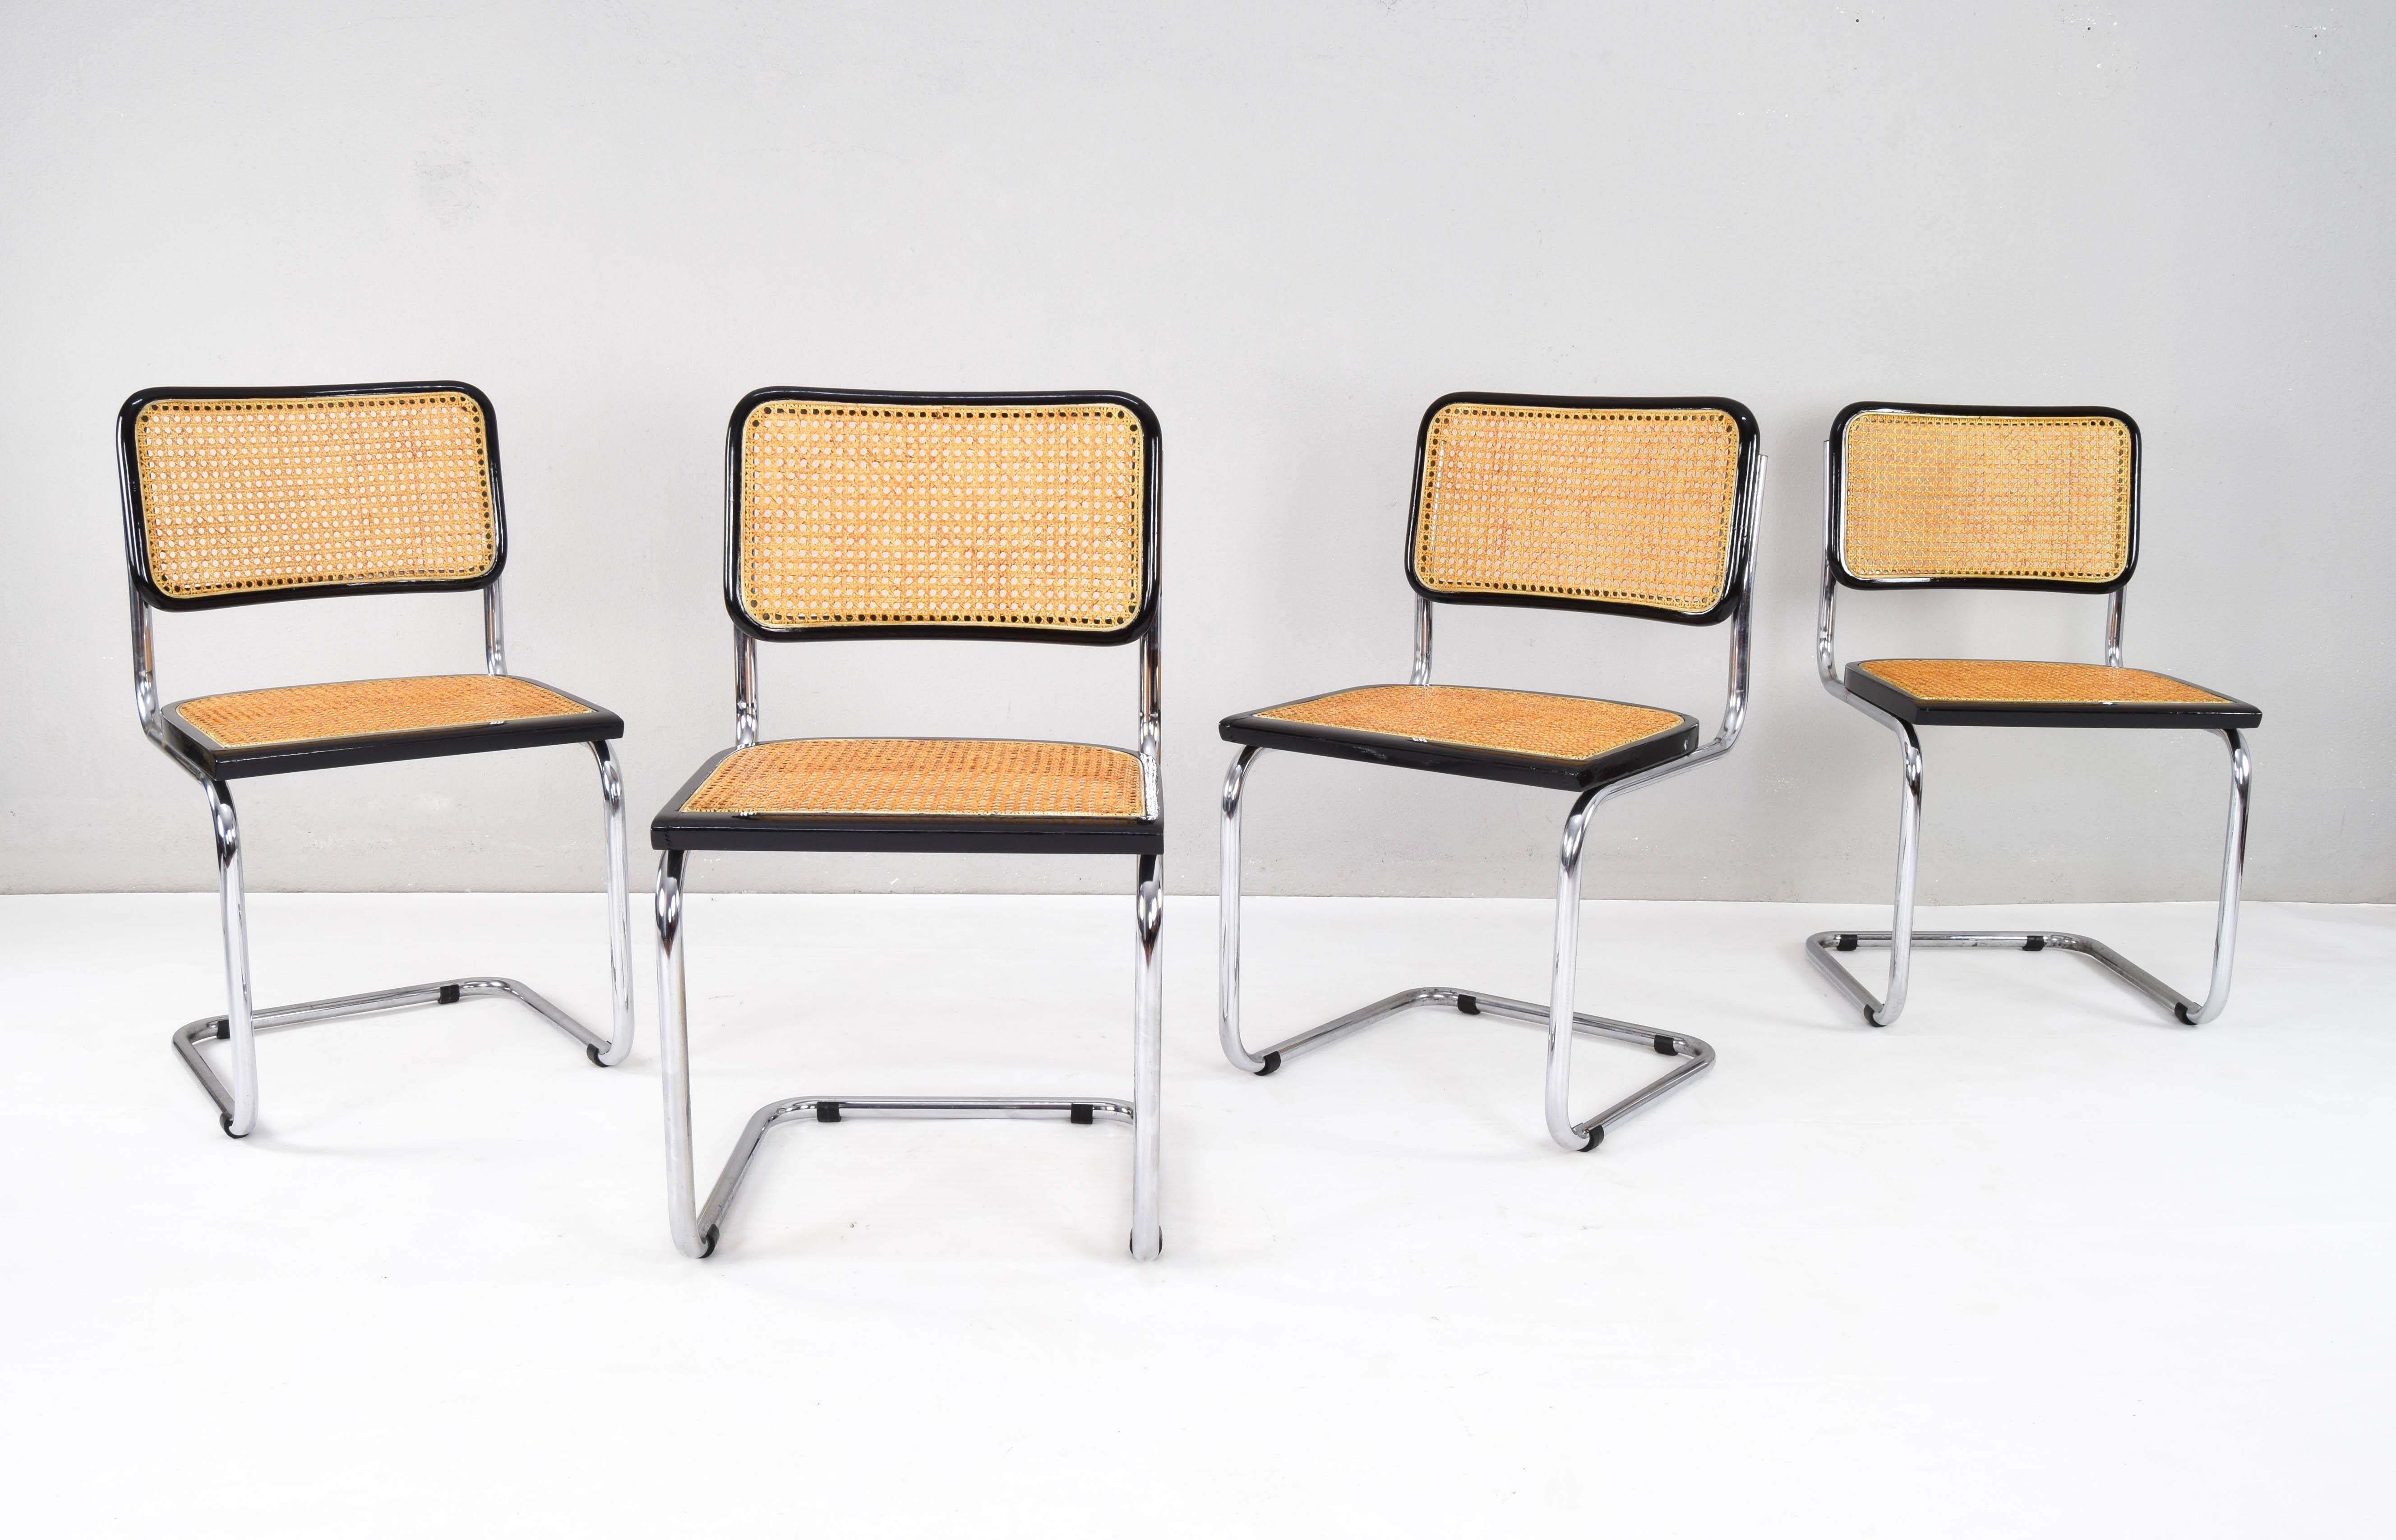 Lacquered Set of Four Mid-Century Modern Italian Marcel Breuer B32 Cesca Chairs, 70s